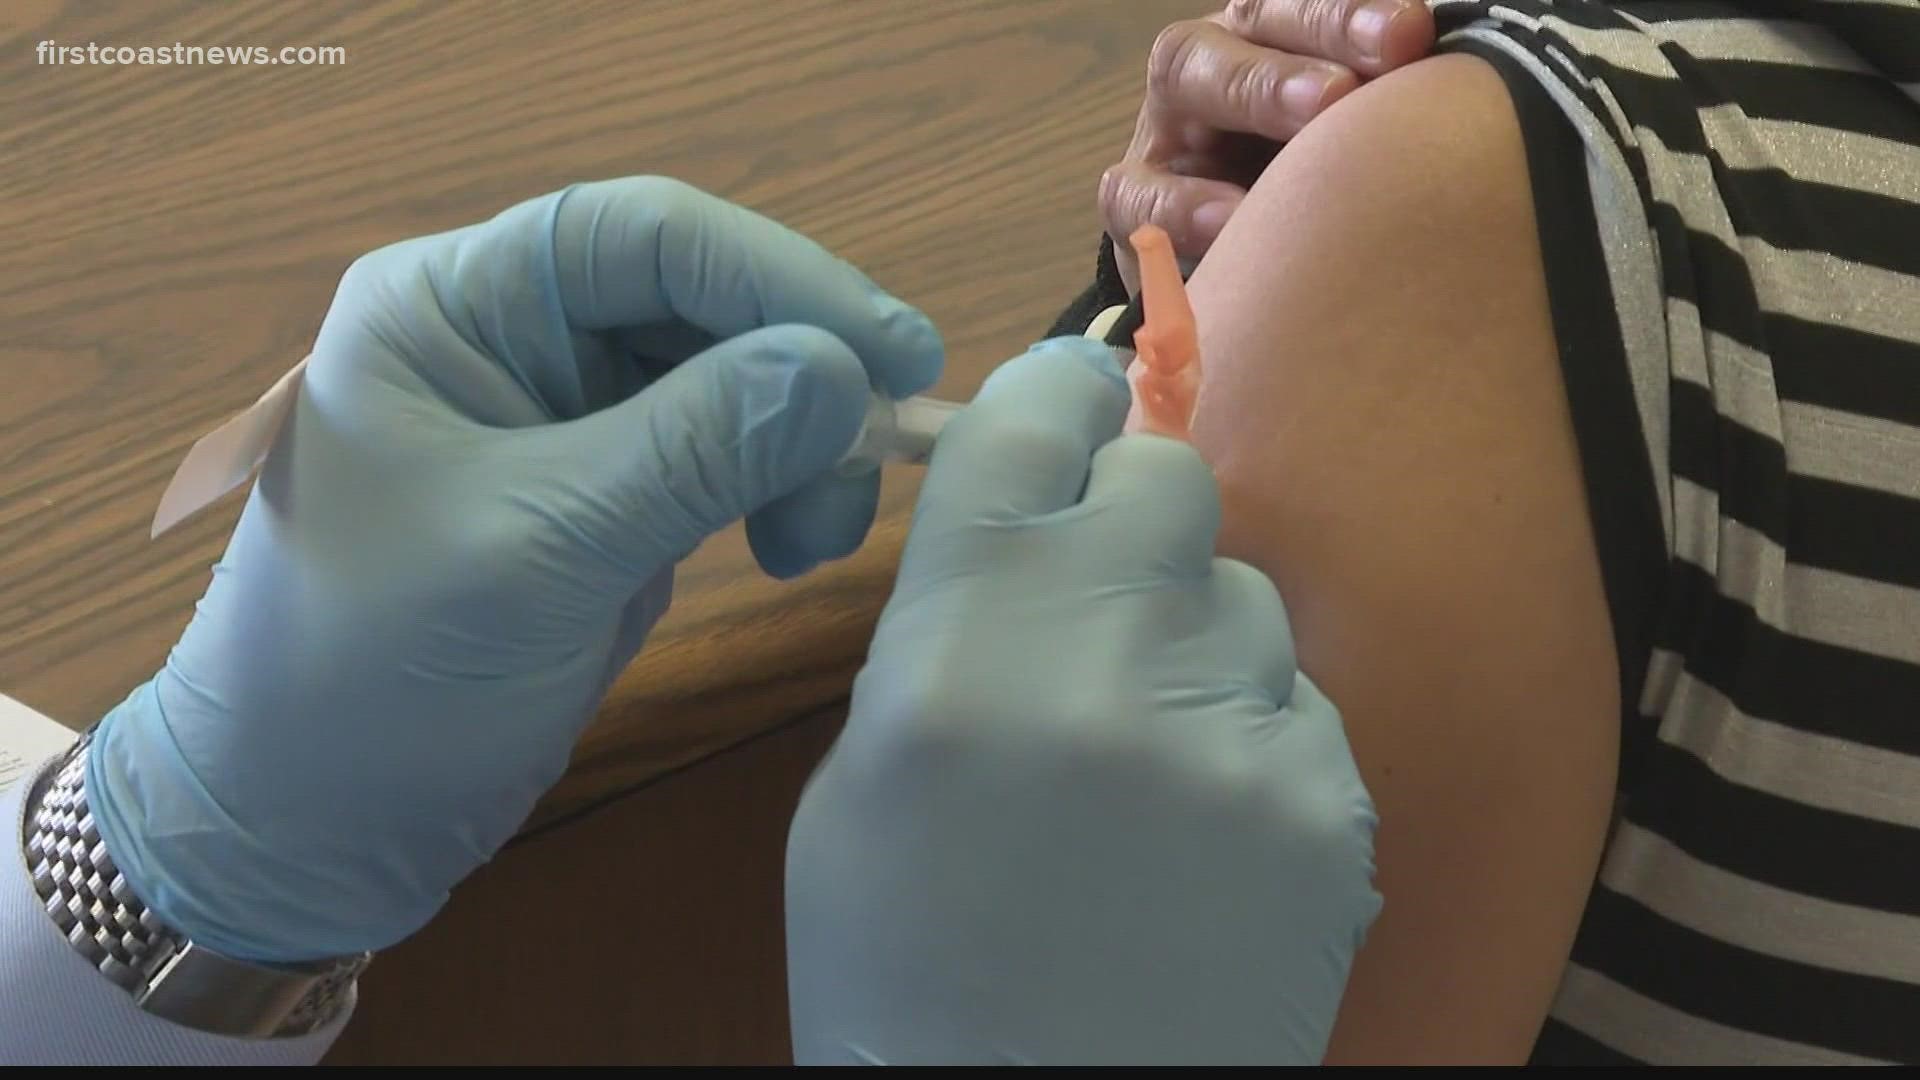 Health experts say getting vaccinated is the most important thing to do before traveling.